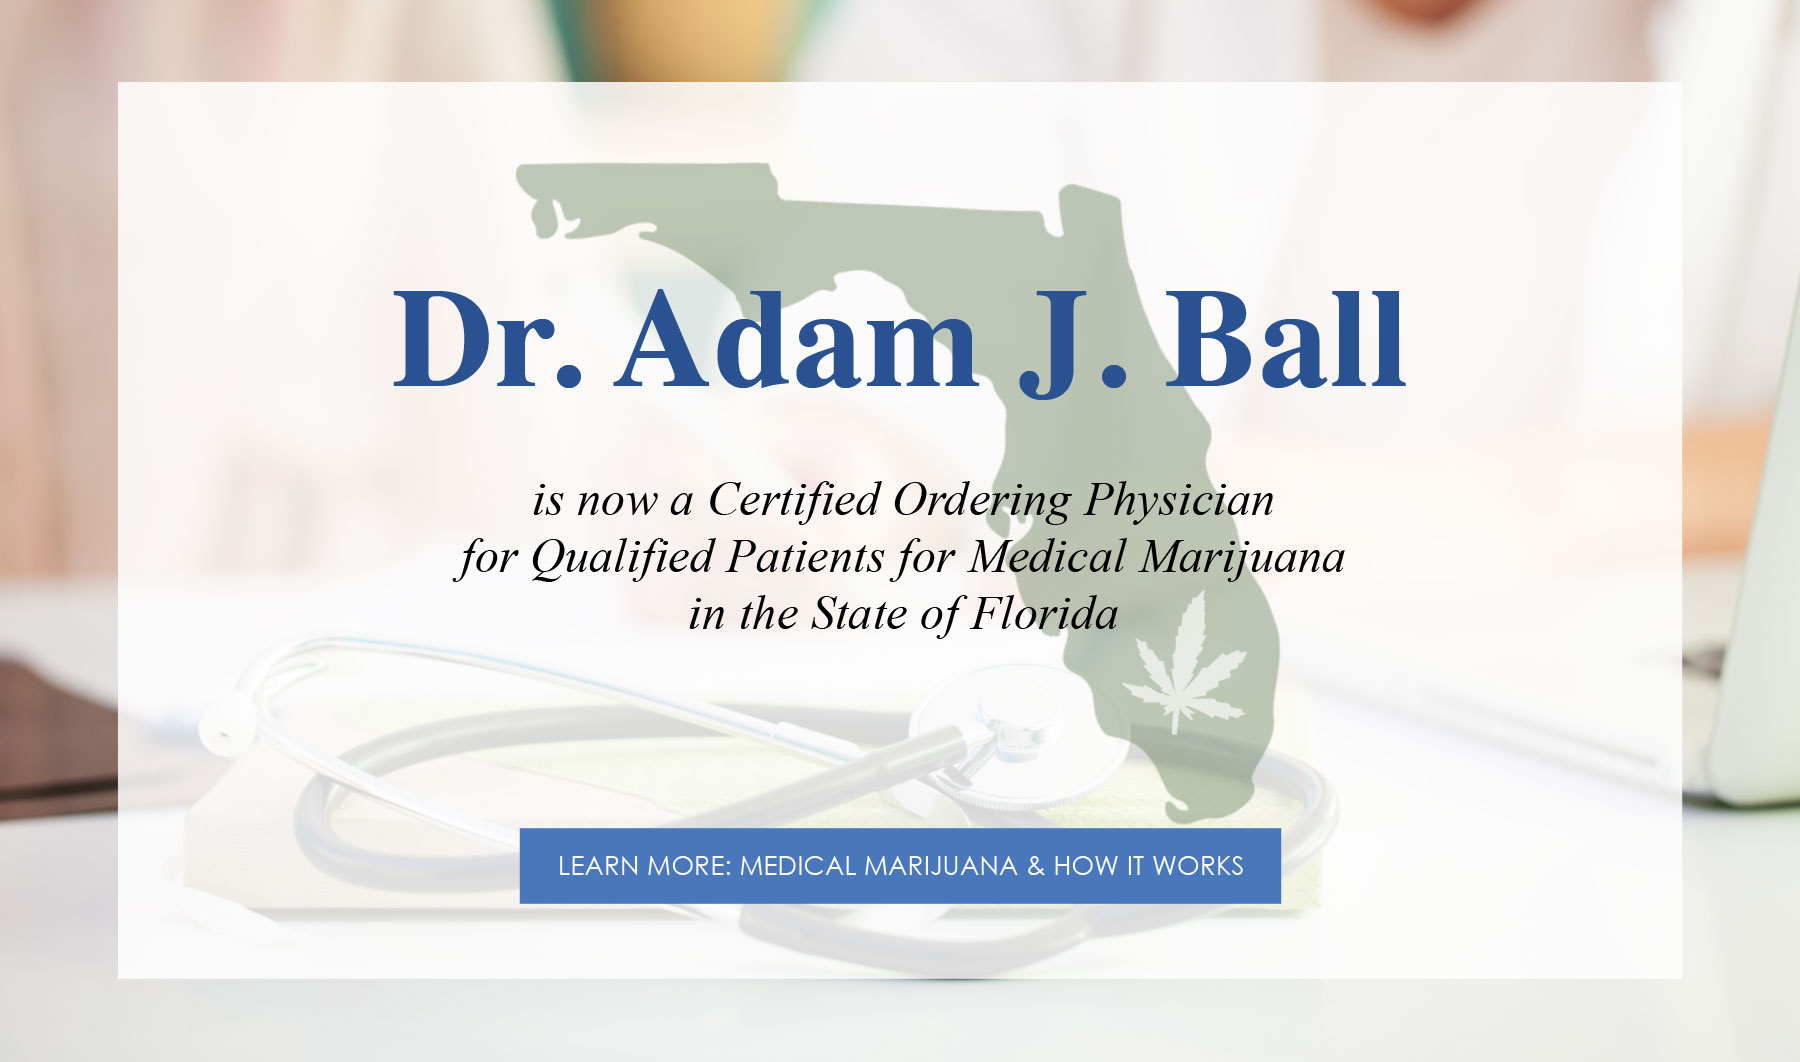 Dr. Adam J. Ball is a certified ordering physician for medical marjiuana in Florida.